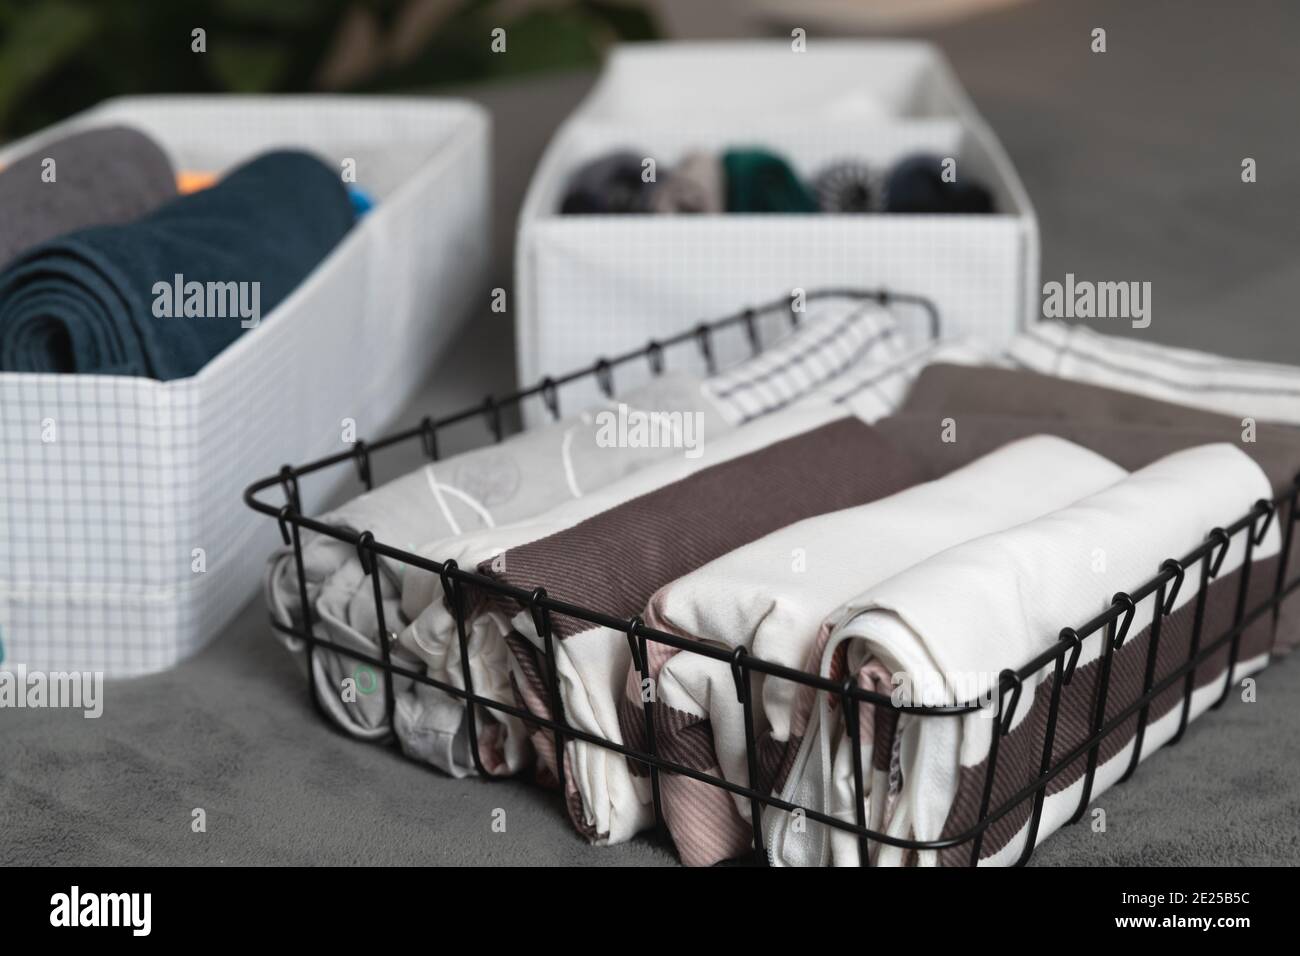 Vertical storage of clothing. Sorted clothes in baskets and shelves in a modern bedromm. Cleaning concept. Stock Photo